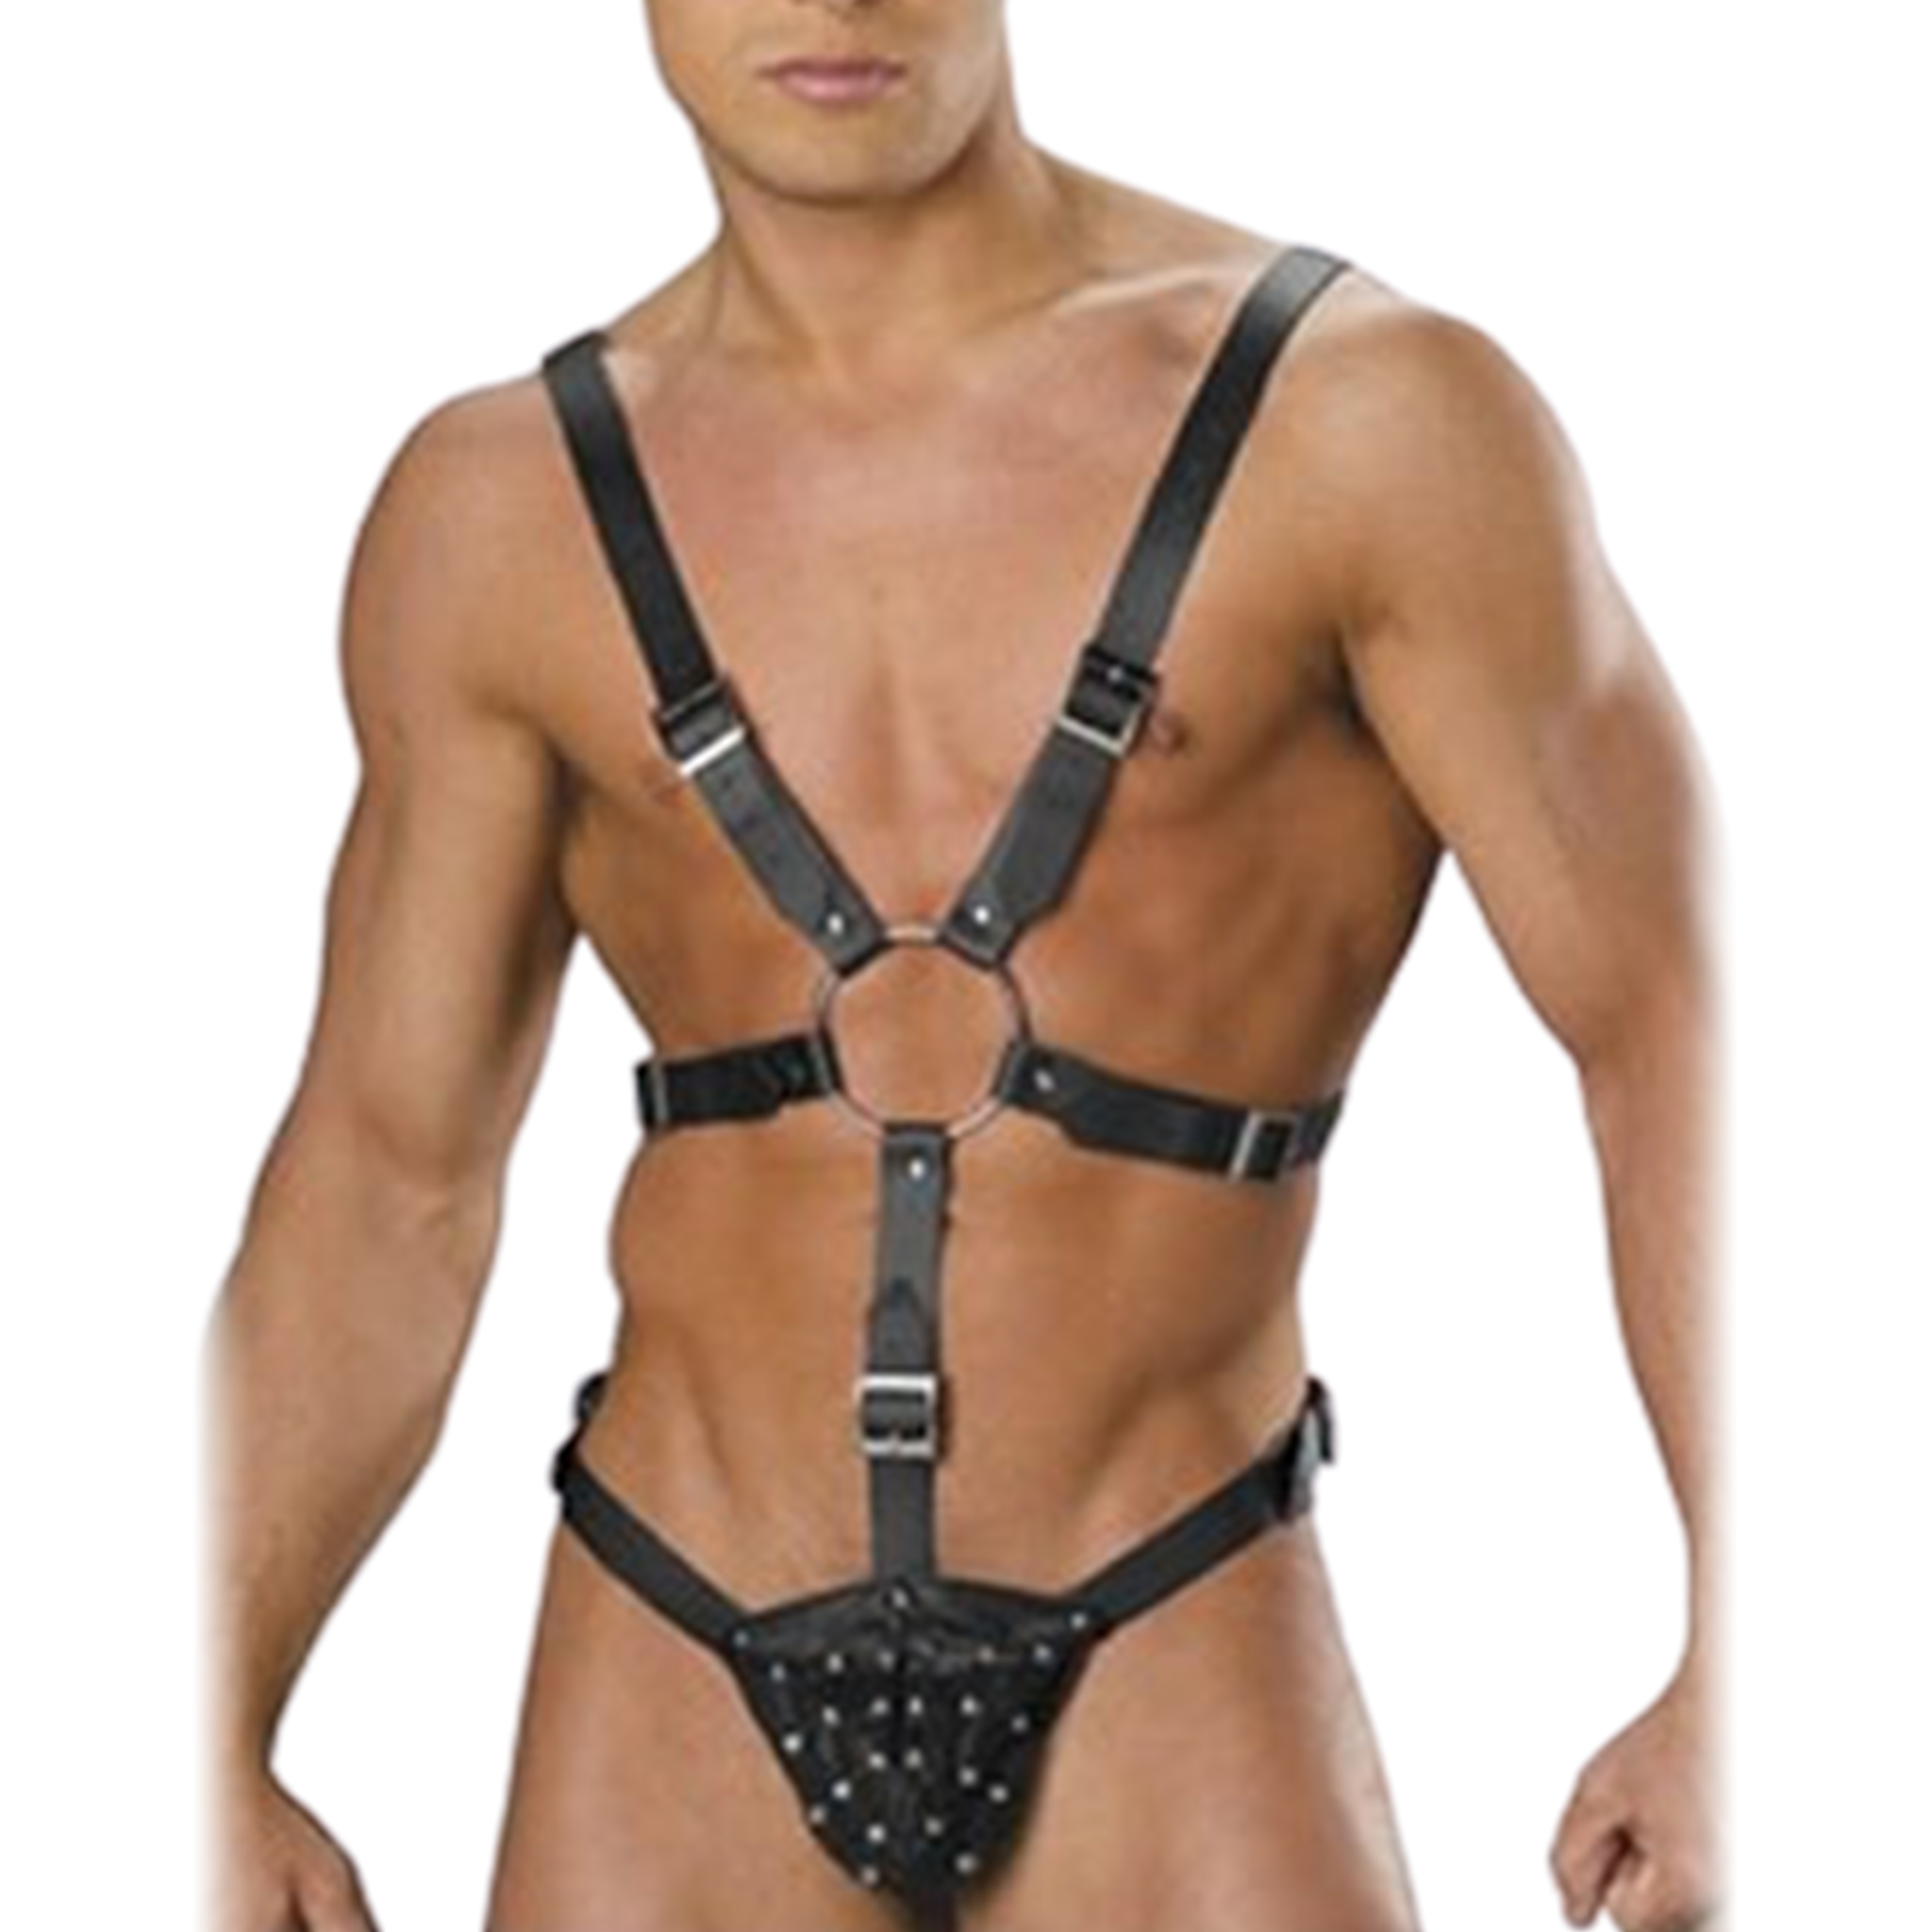 Studded Pouch Body Harness